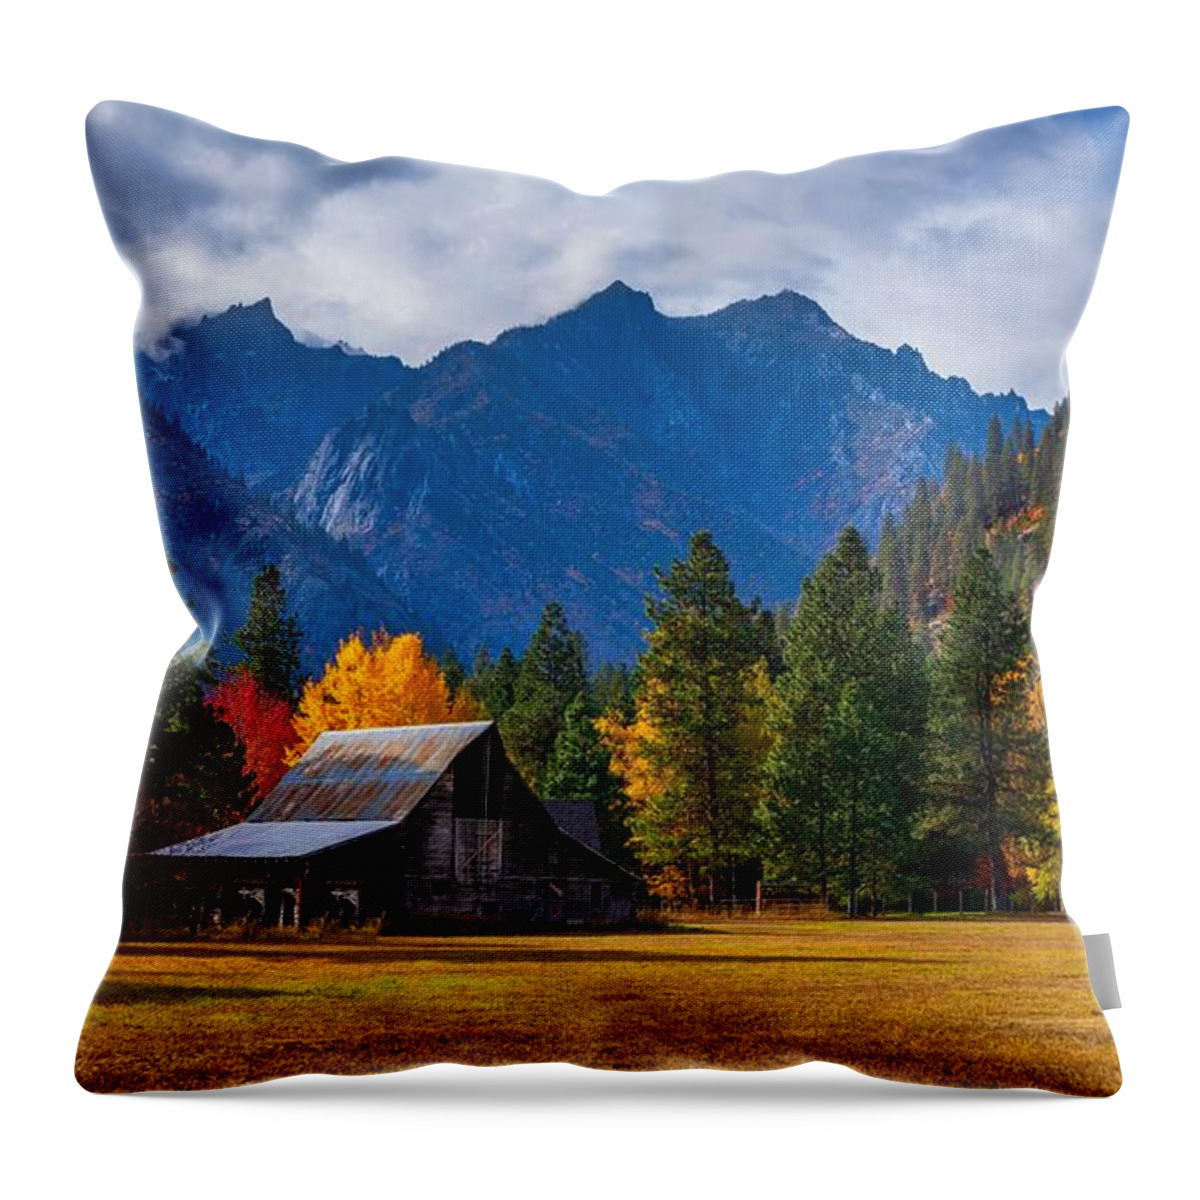 The Old Homestead Throw Pillow featuring the photograph The Old Homestead by Lynn Hopwood